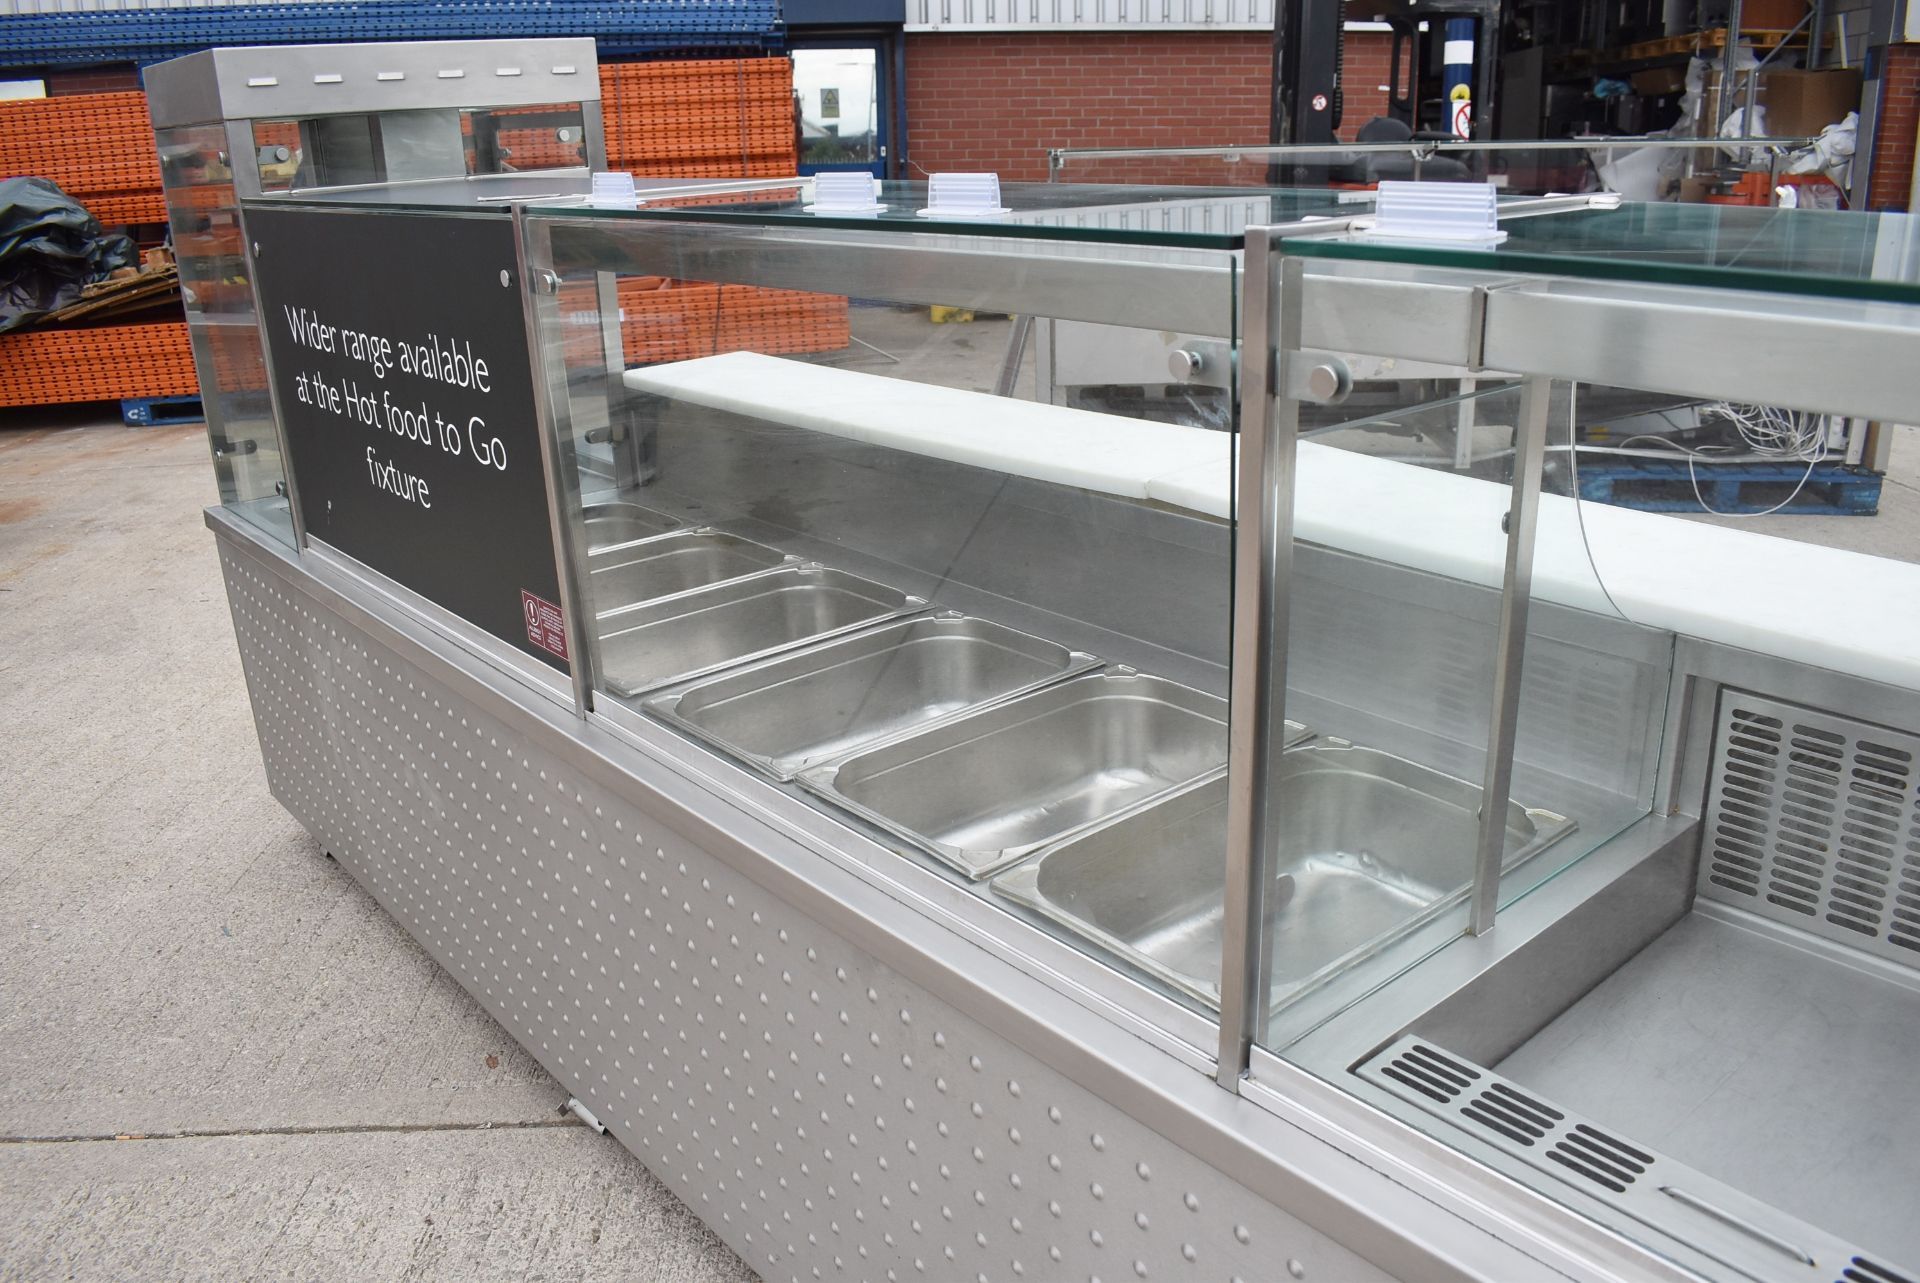 1 x Promart Heated Retail Counter For Take Aways, Hot Food Retail Stores or Canteens etc - - Image 51 of 54